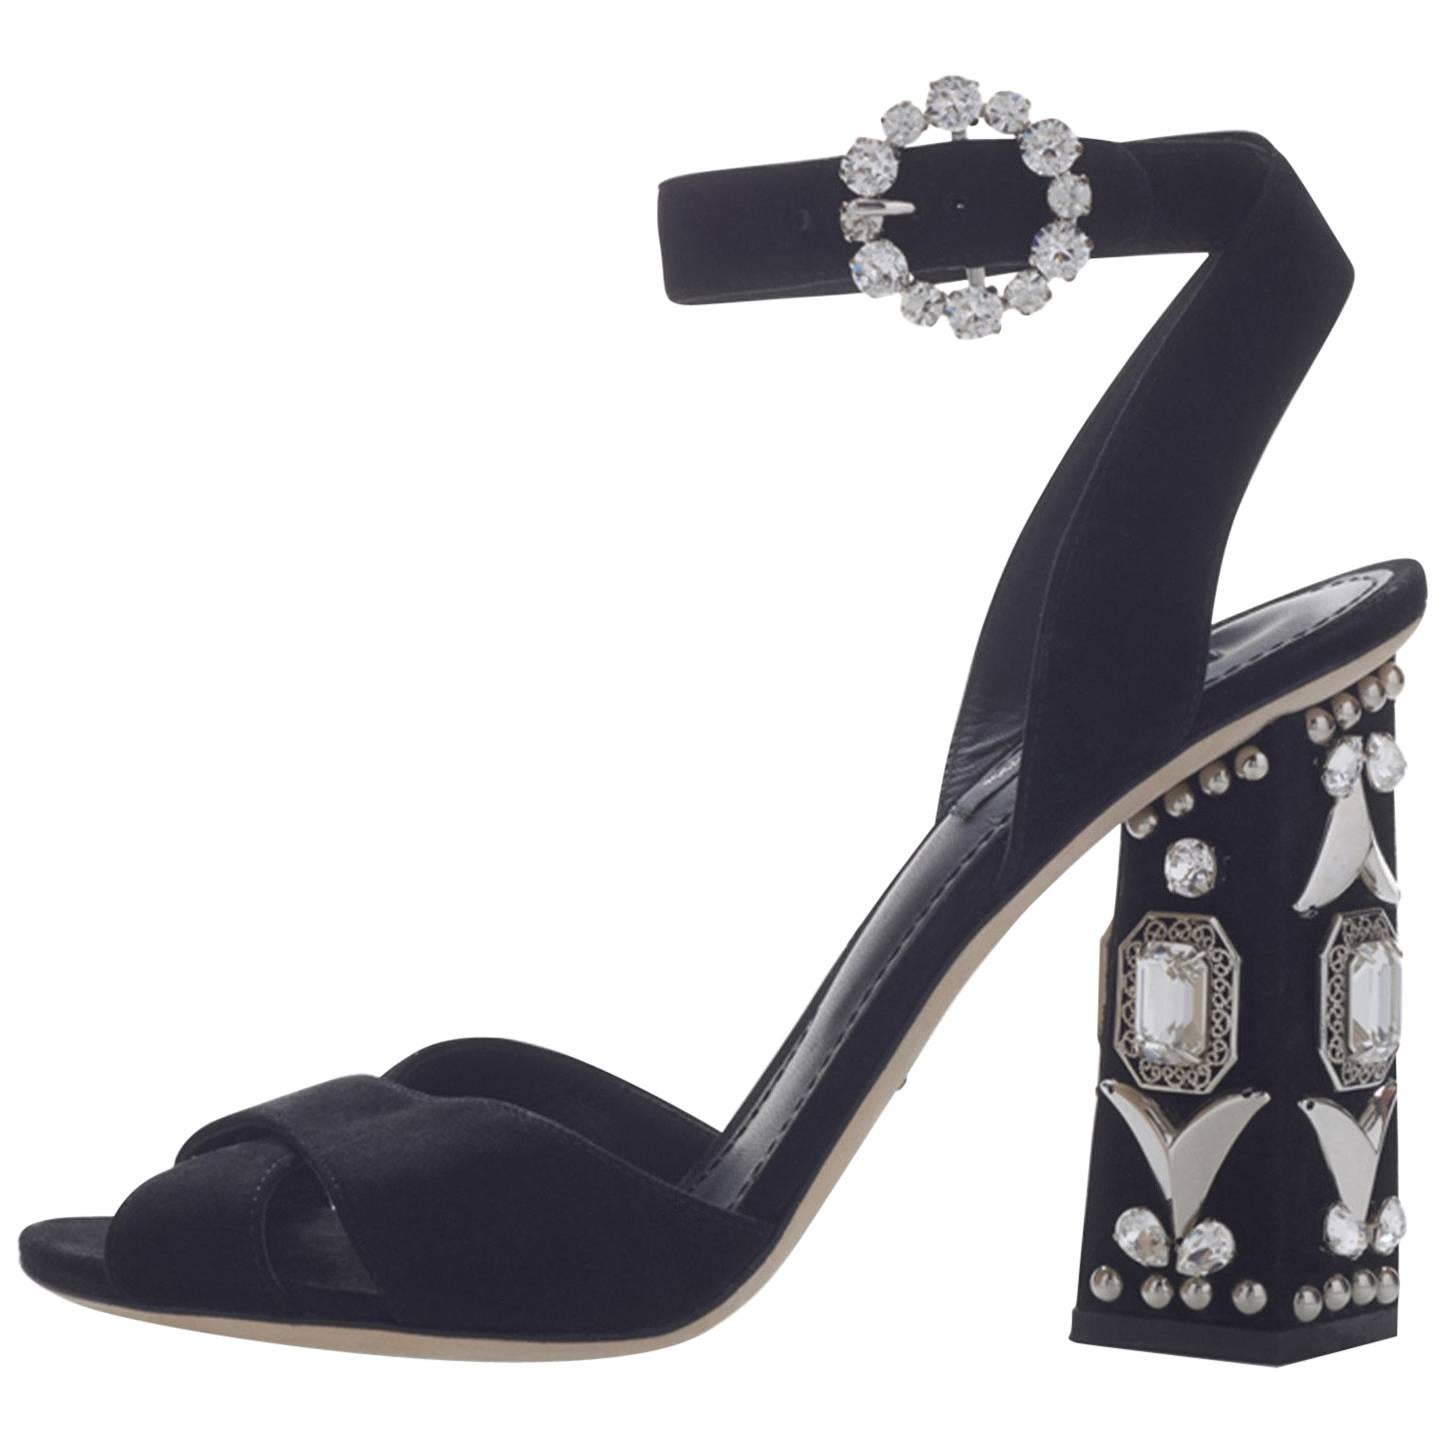 Dolce & Gabbana New Sold Out Black Crystal Evening Sandals Heels in Box